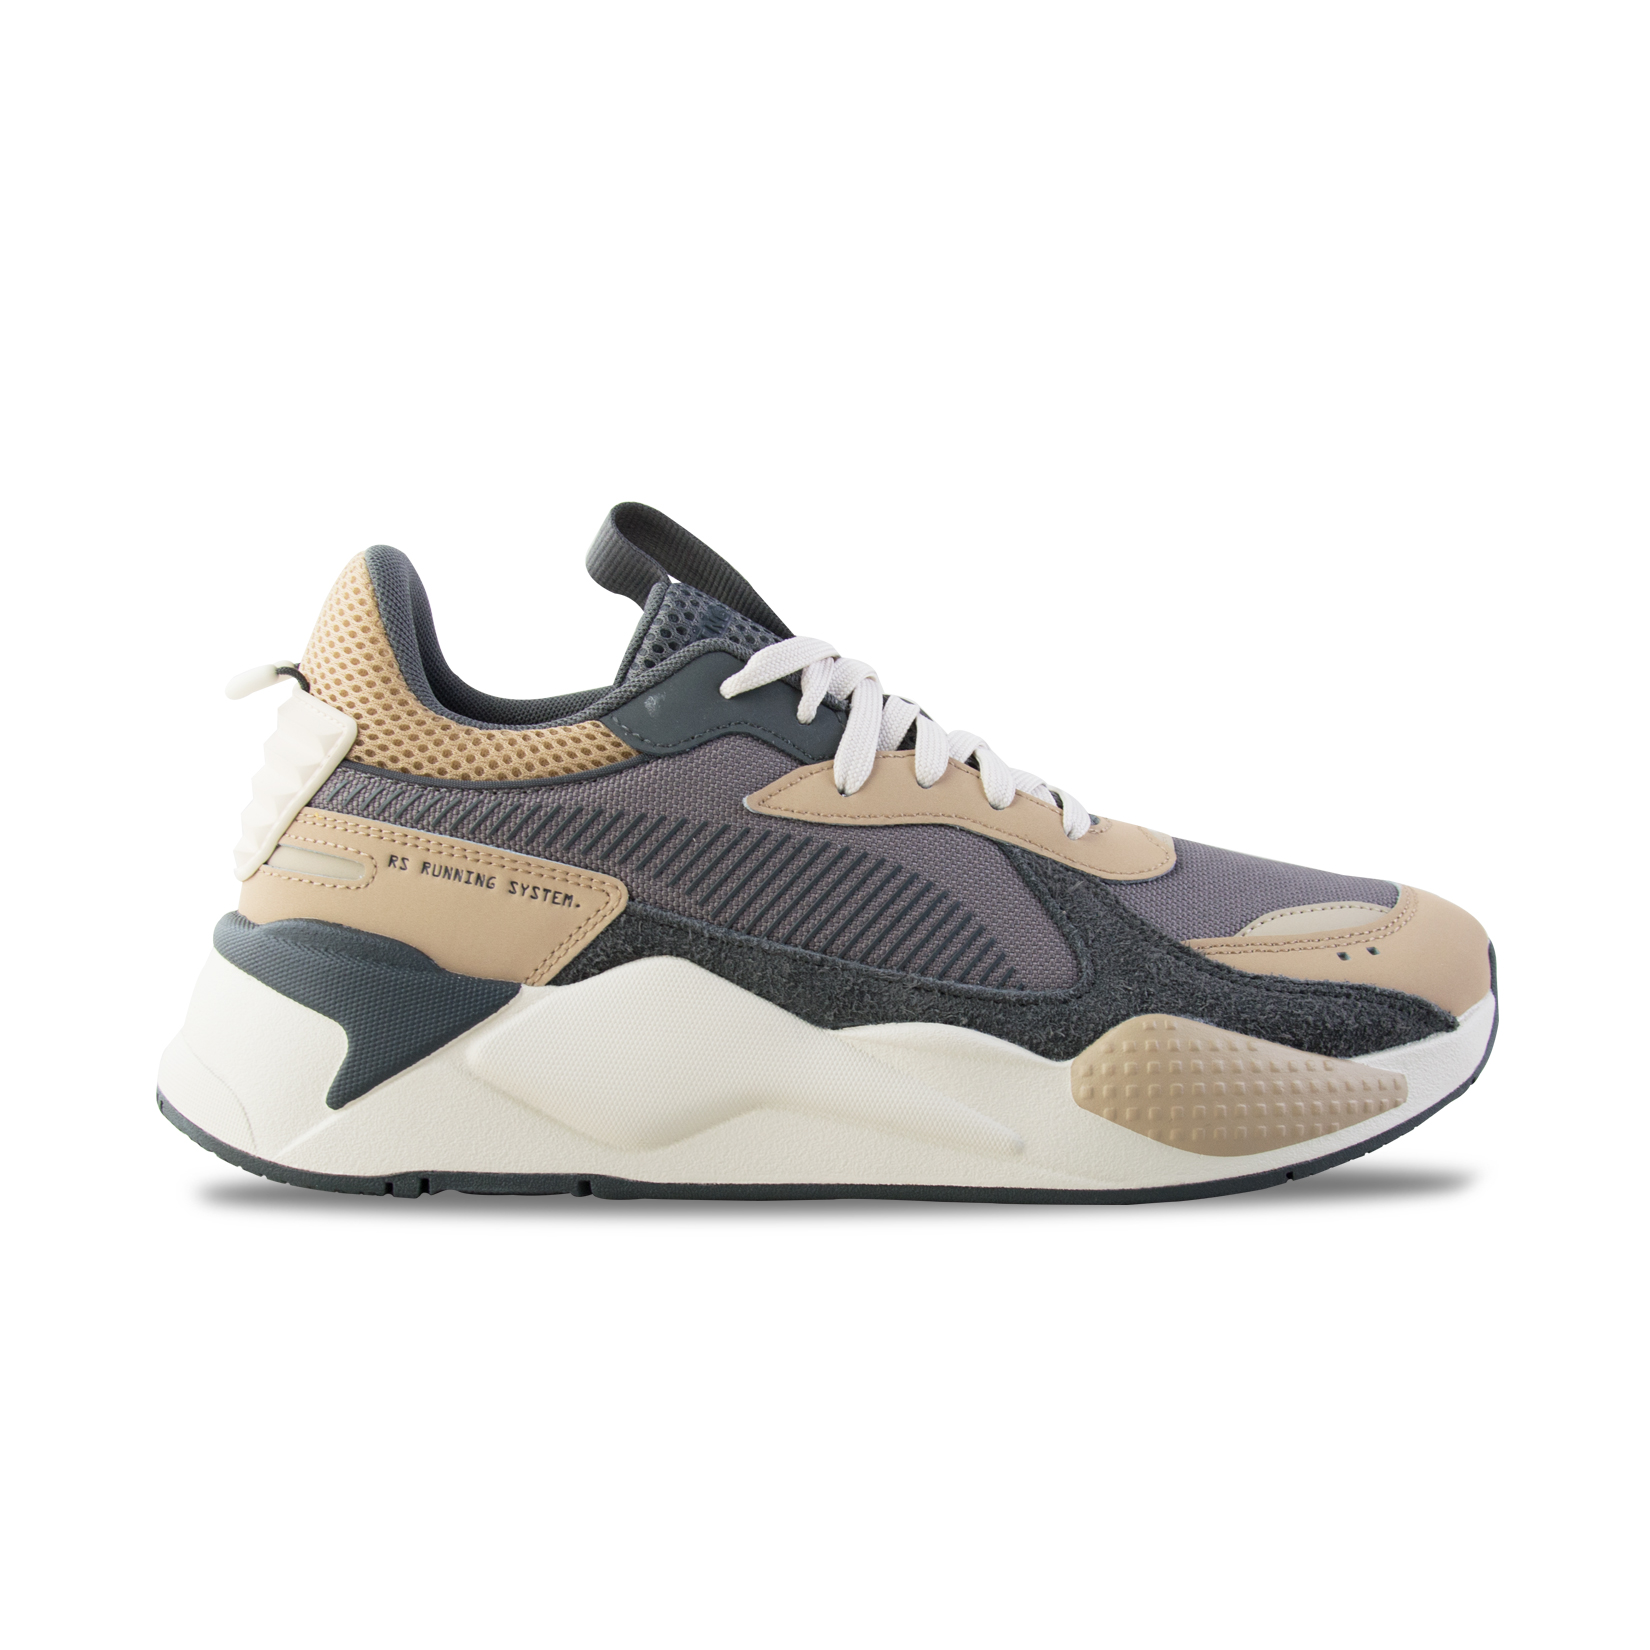 Puma RS-X Suede Sneaker Running Insole Ανδρικο Παπουτσι Καφε - Μπεζ